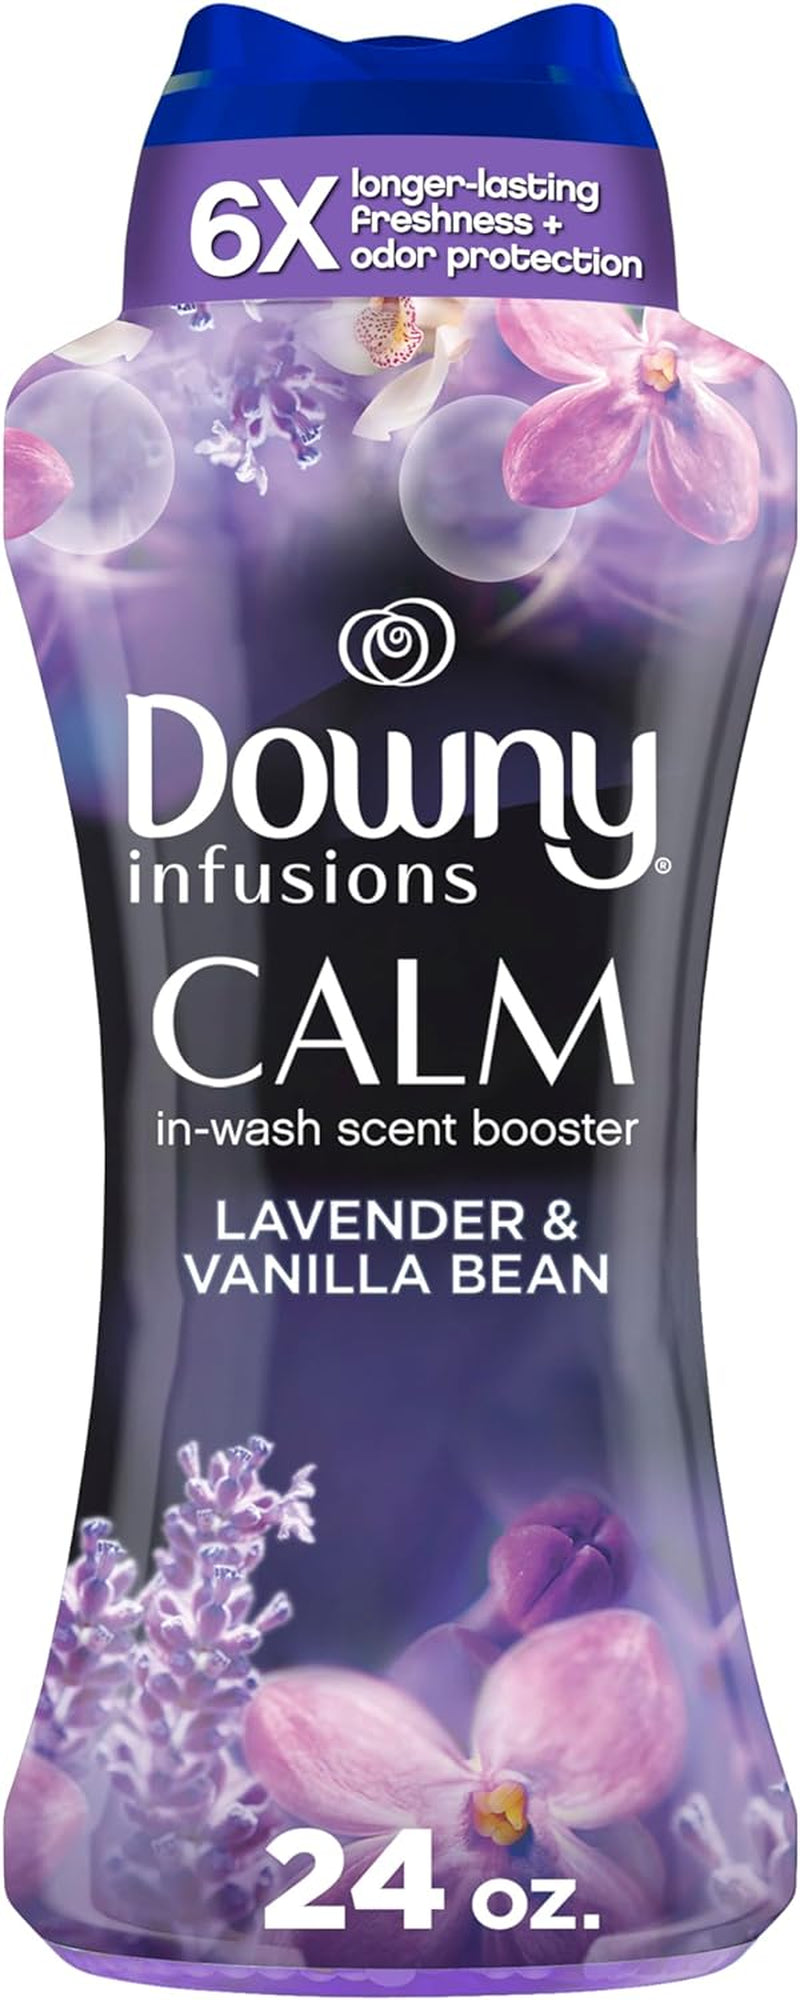 Infusions In-Wash Laundry Scent Booster Beads, CALM, Soothing Lavender and Vanilla Bean, 24 Oz